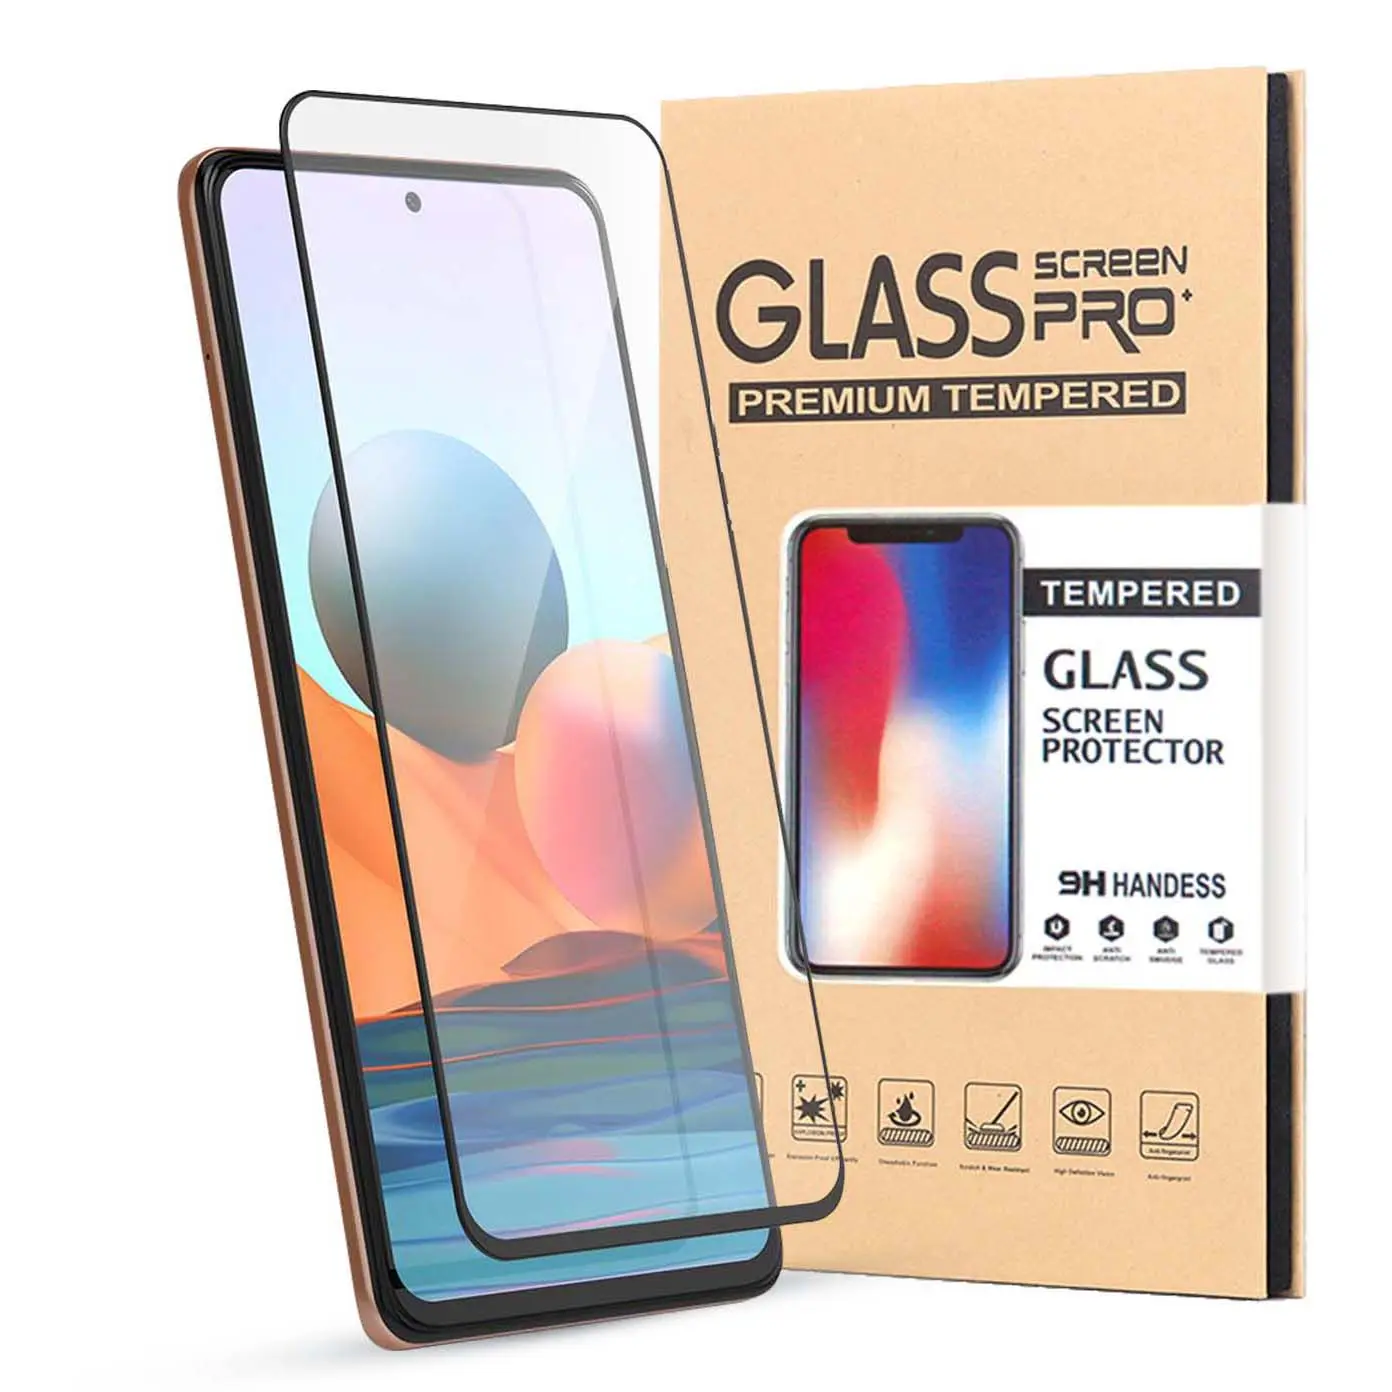 2.5D Silk Full Cover Tempered Glass Screen Protector for Xiaomi Redmi Note 11/10/9 pro max /Redmi 11T 10 with retail packaging